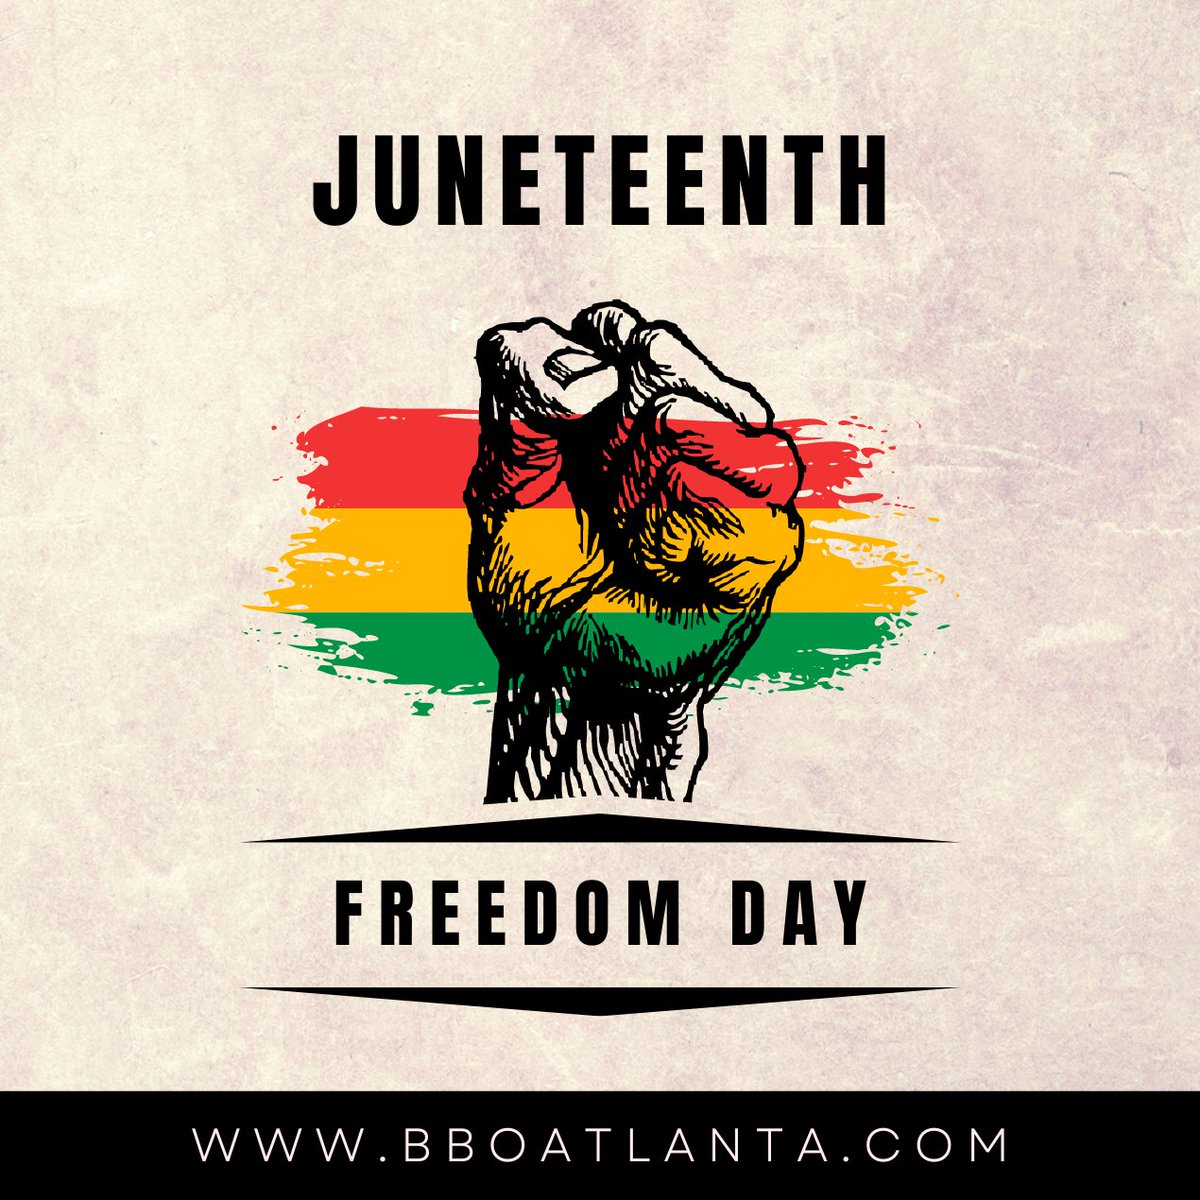 It's Juneteenth. The chains are broken. Let's show them what we can BUILD!

BBOATLANTA.COM 

#blackbusinessownersofatlanta #blackbusinessowners #blackownedbusiness #blackbusinessowner #blackmeninbusiness #juneteenth #blackwomeninbusiness